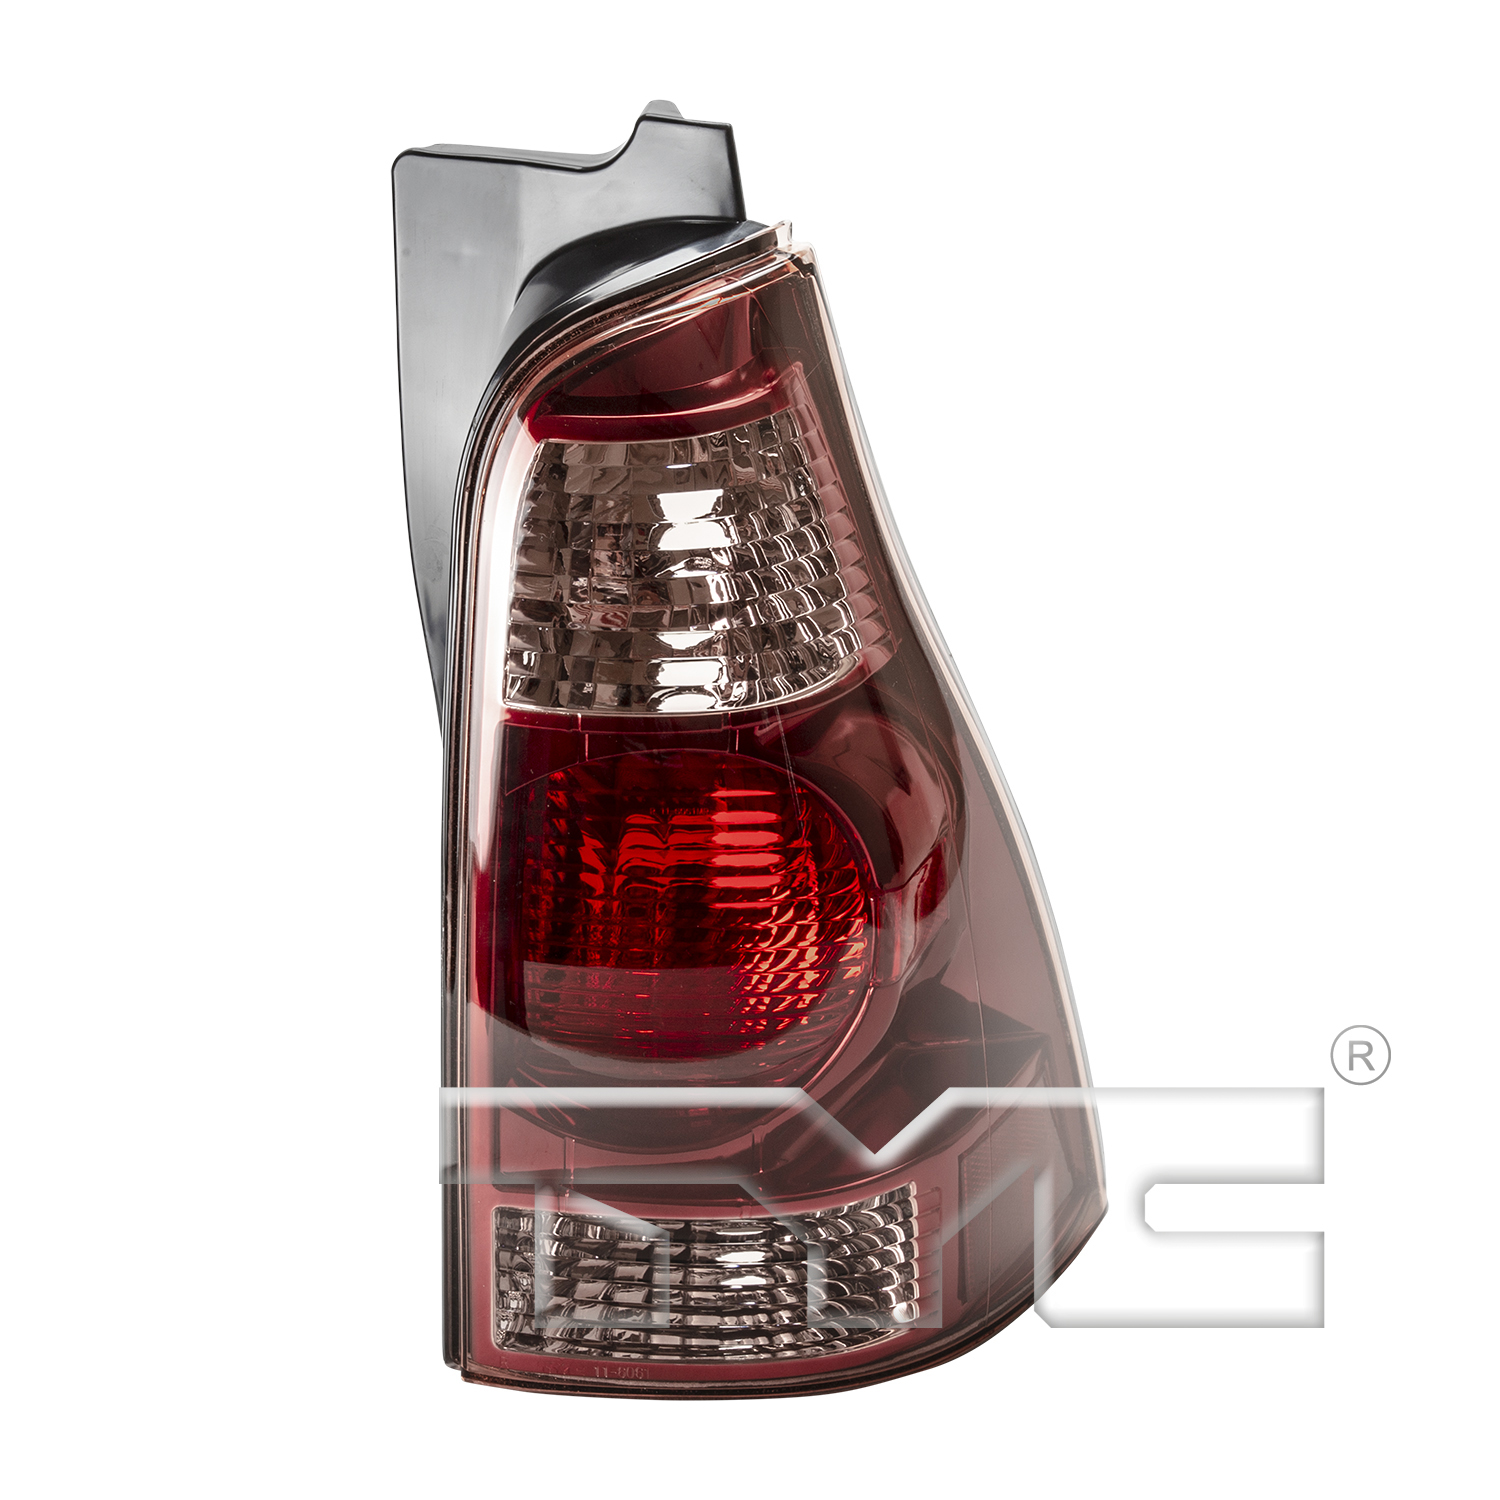 Aftermarket TAILLIGHTS for TOYOTA - 4RUNNER, 4RUNNER,03-05,RT Taillamp assy